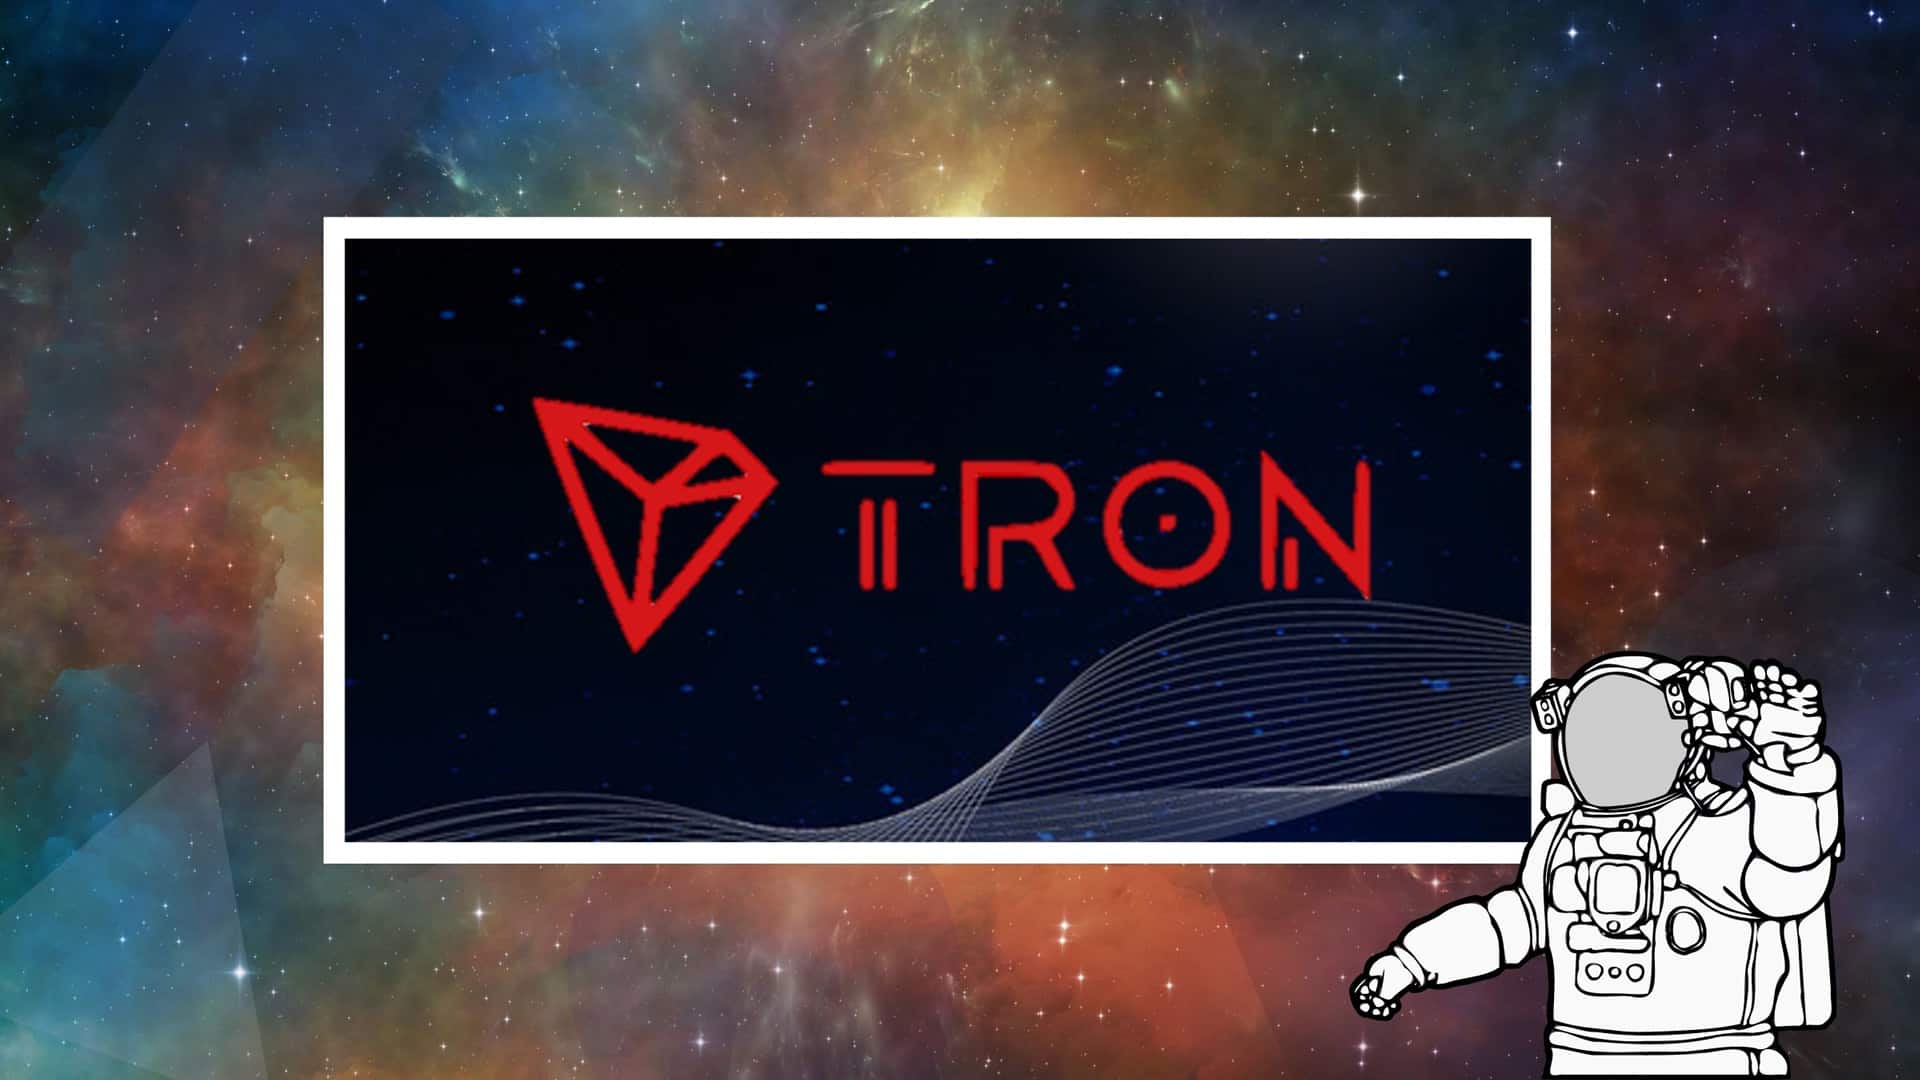 tron gamefi fund TRON Foundation has recently announced a new 0 million fund to incentivize GameFi projects on top of the controversial Chinese blockchain.